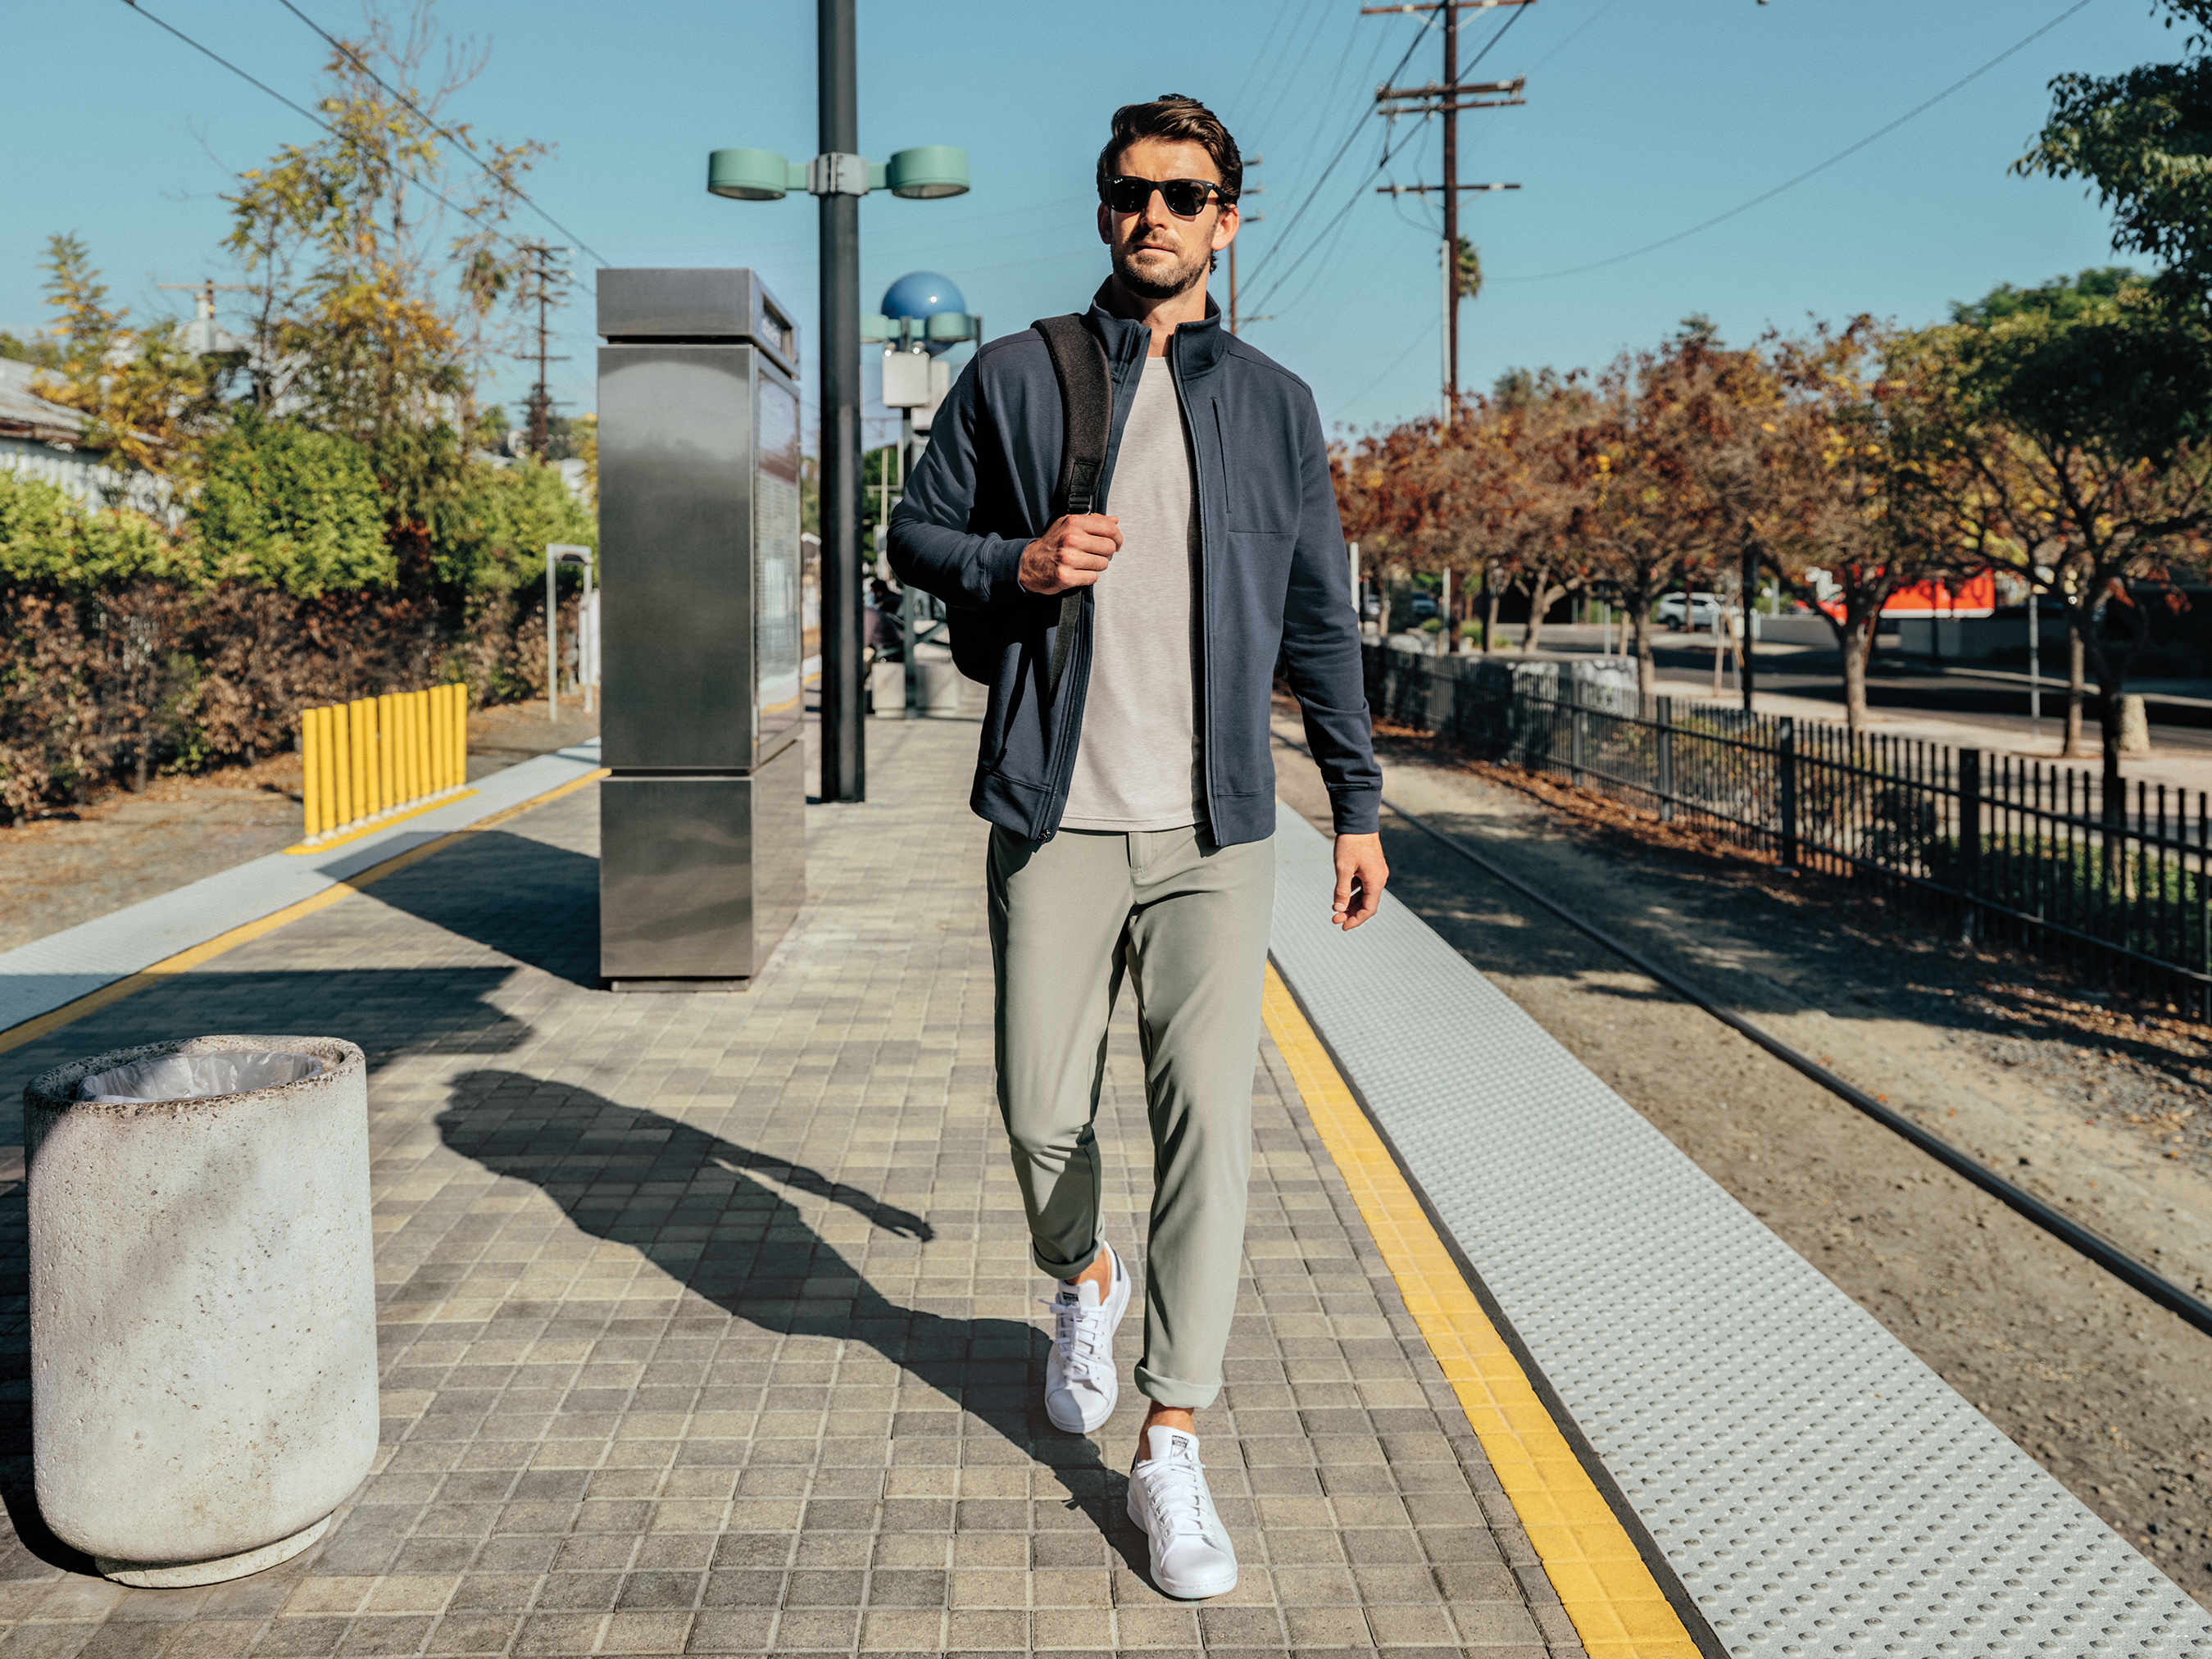 DICK’S Sporting Goods Launches “VRST” - An Exclusive, New Men’s Apparel Brand Positioned To Be A First Of Its Kind For The Company